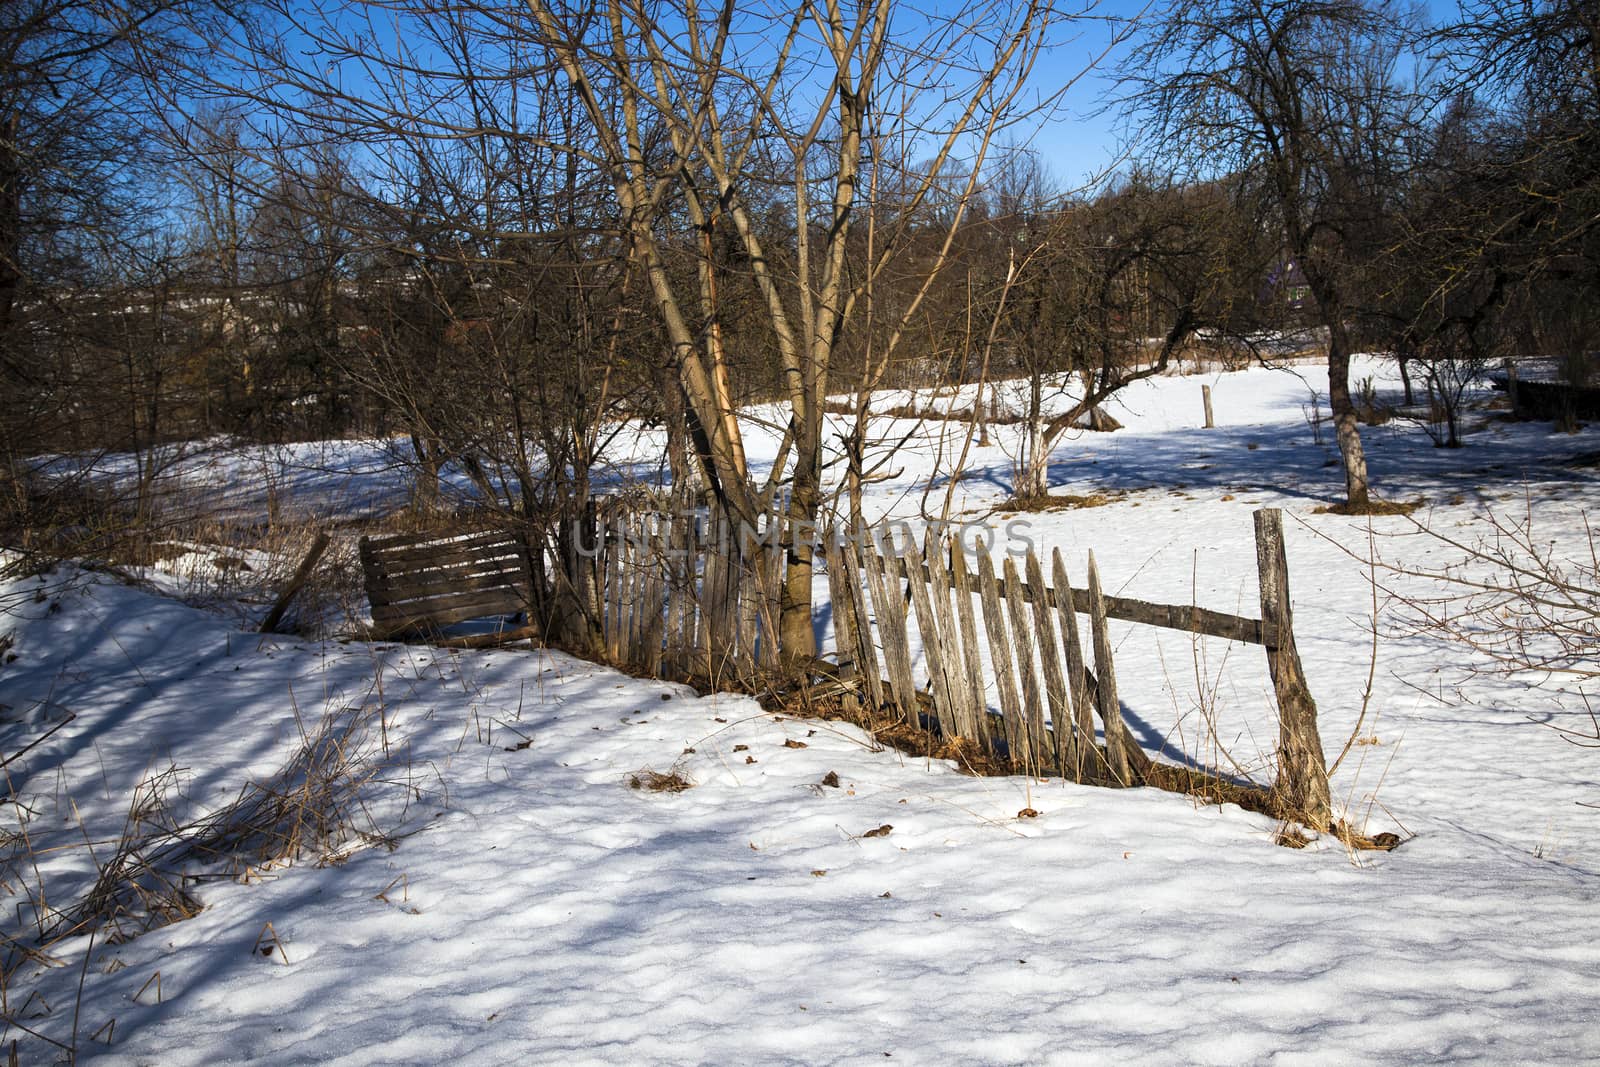   the old destroyed wooden fence in a winter season